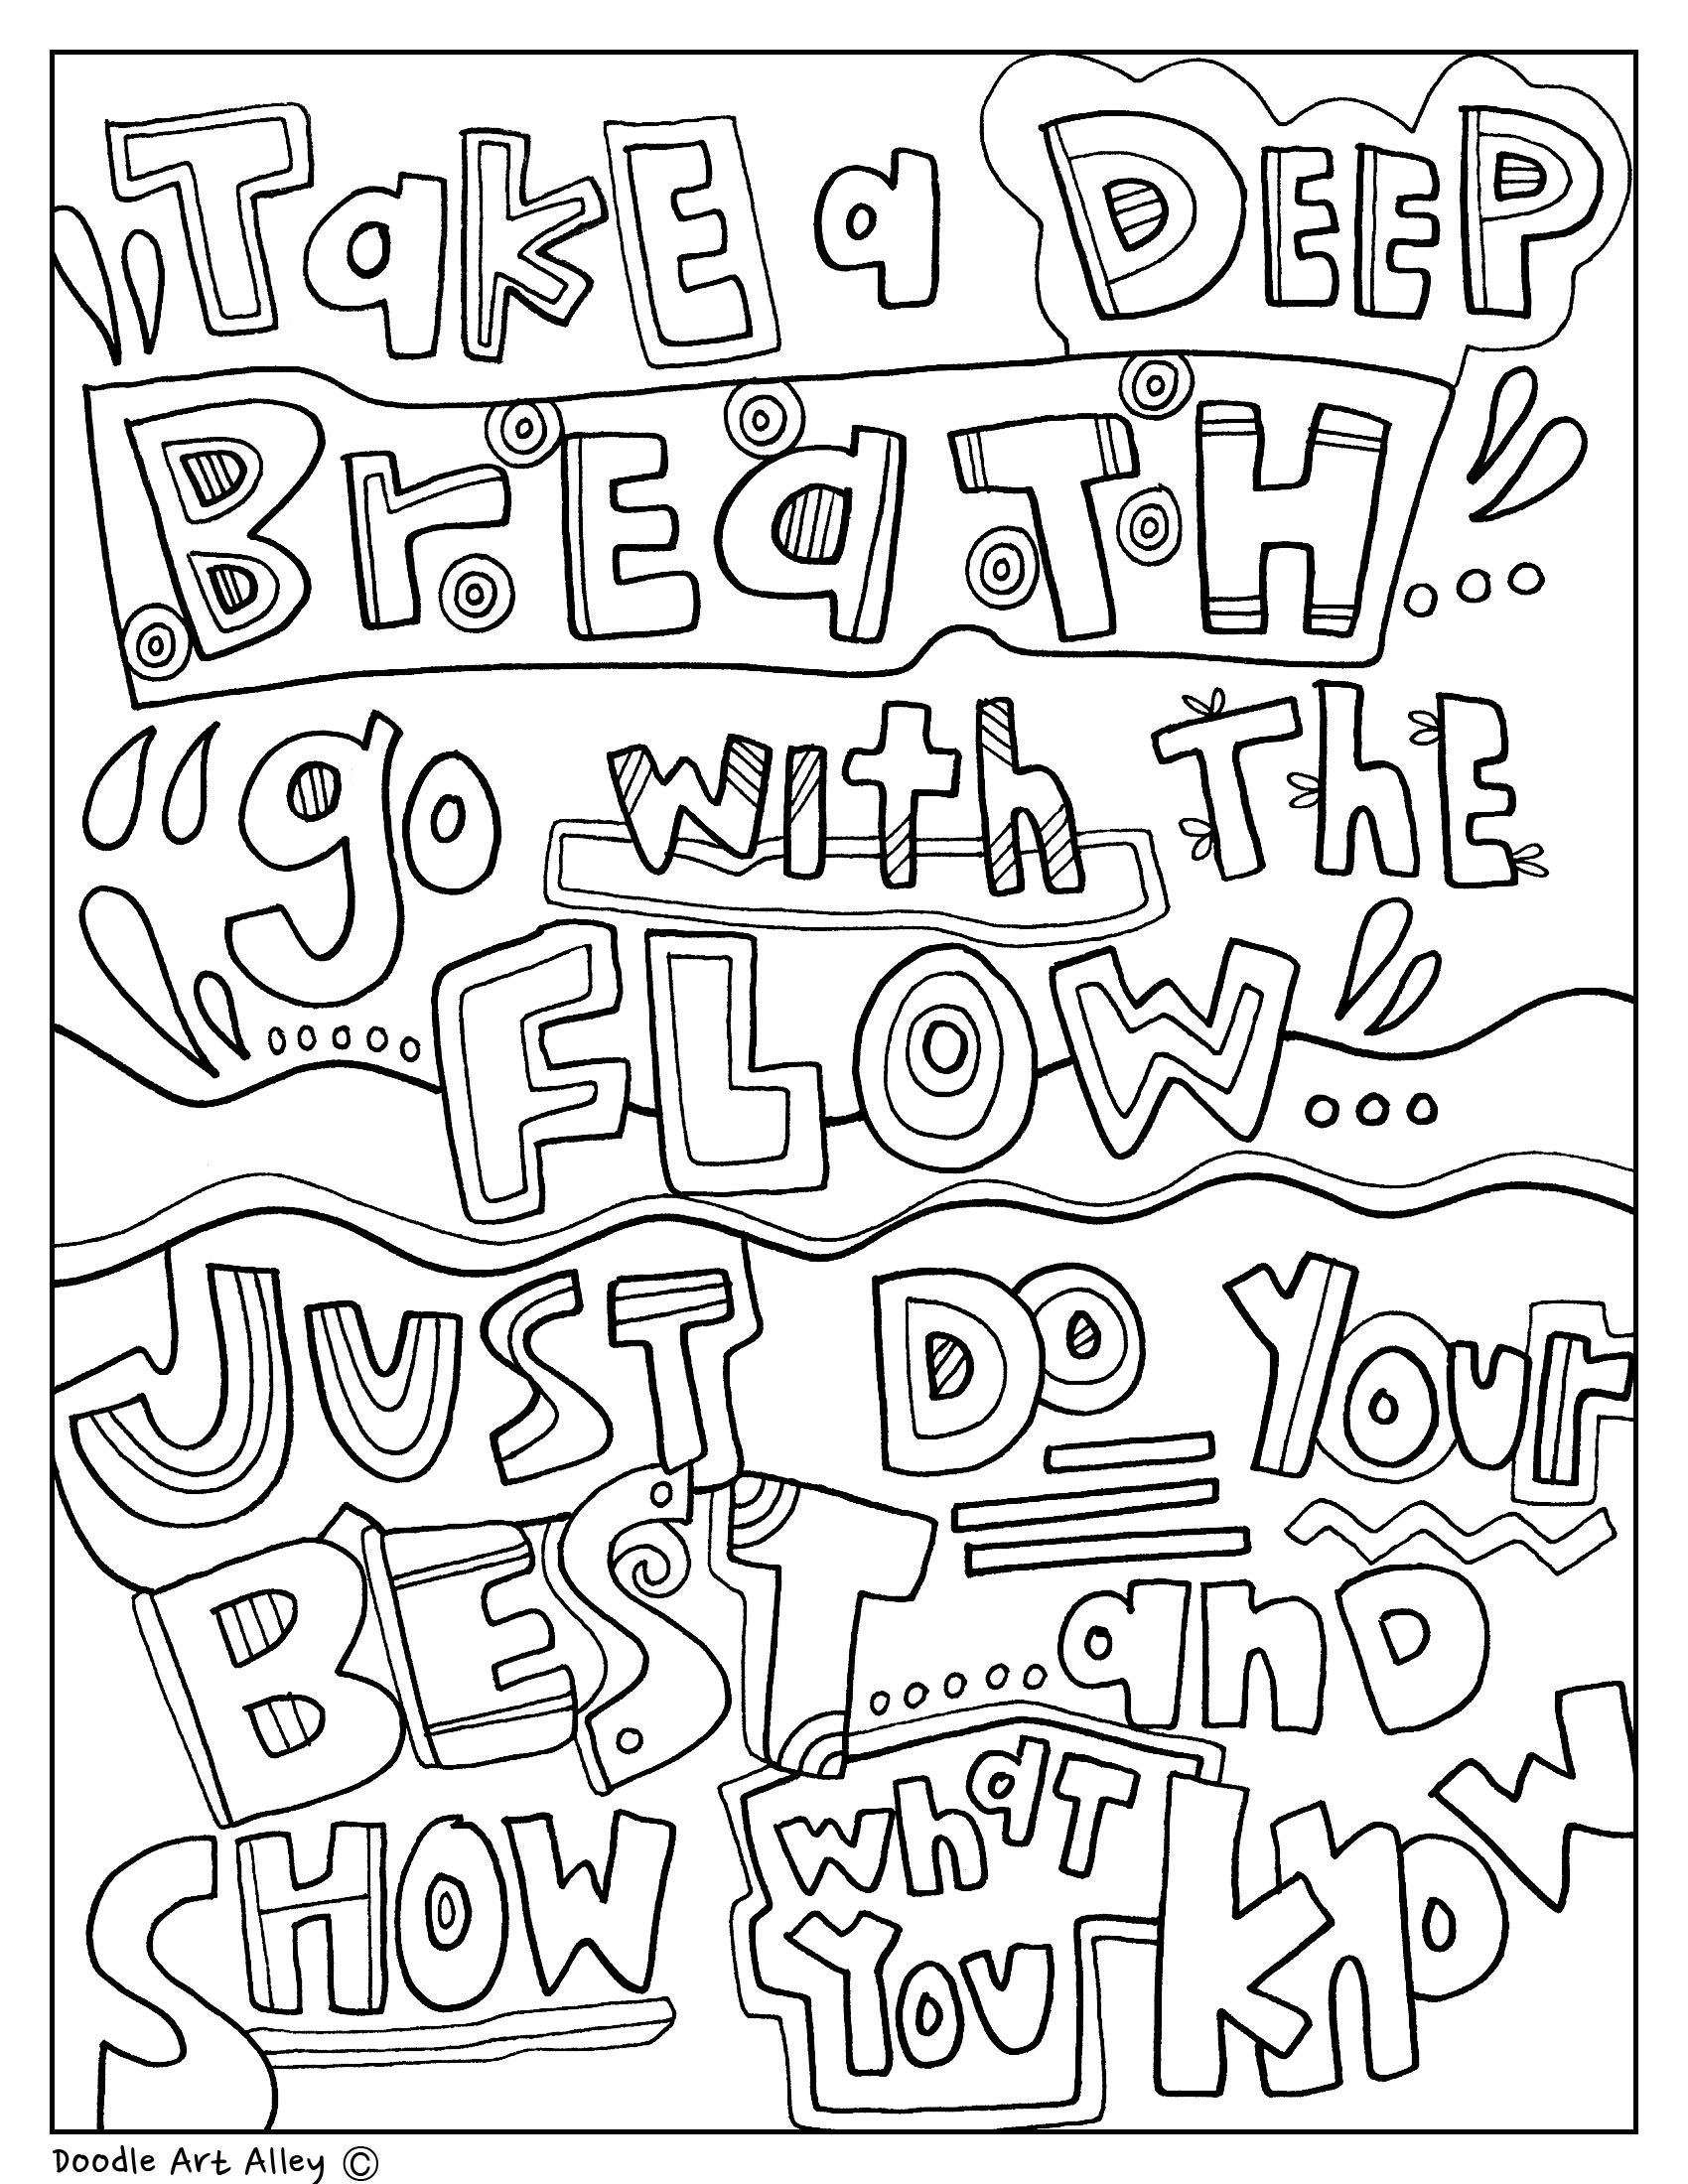 Testing encouragement coloring pages classroom doodles from doodle art alley testing encouragement quote coloring pages color quotes